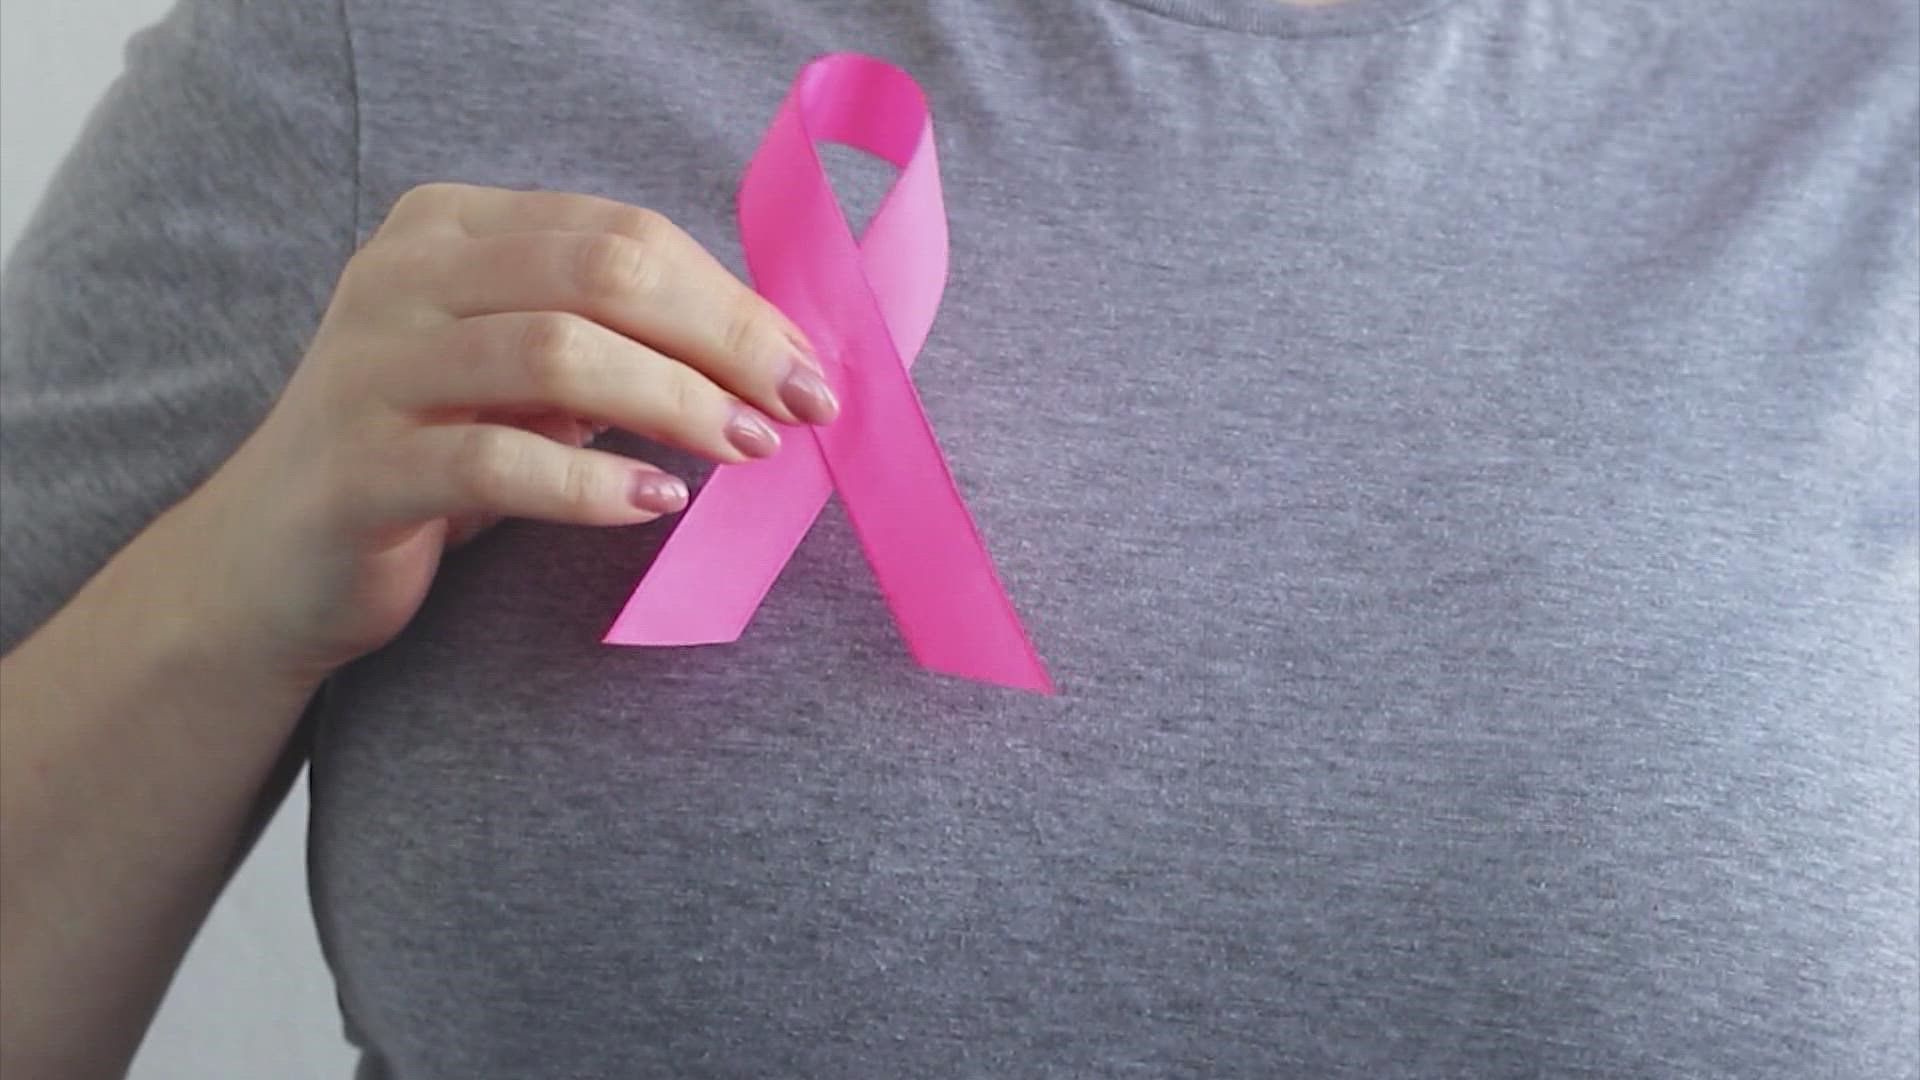 October is Breast Cancer Awareness Month. One in eight women will be diagnosed with breast cancer in her lifetime.